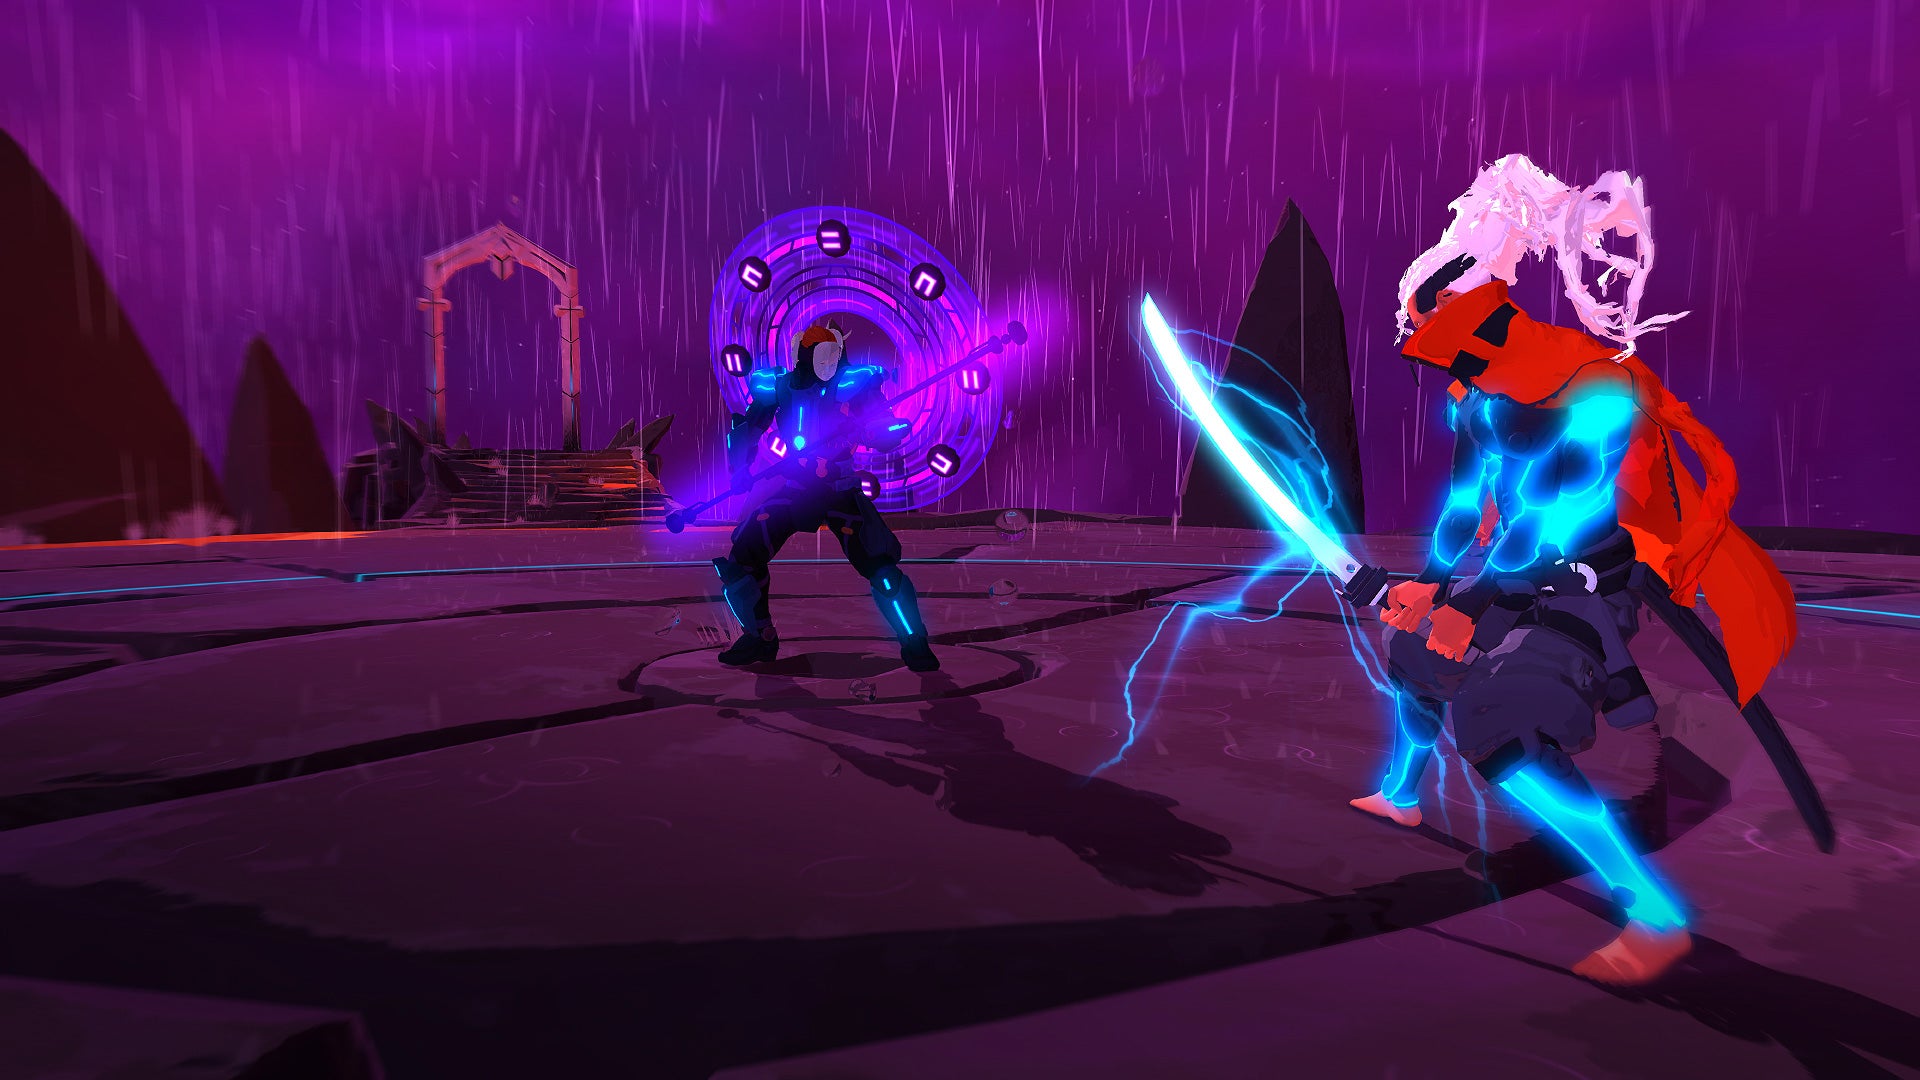 Two characters prepare to duel in Furi